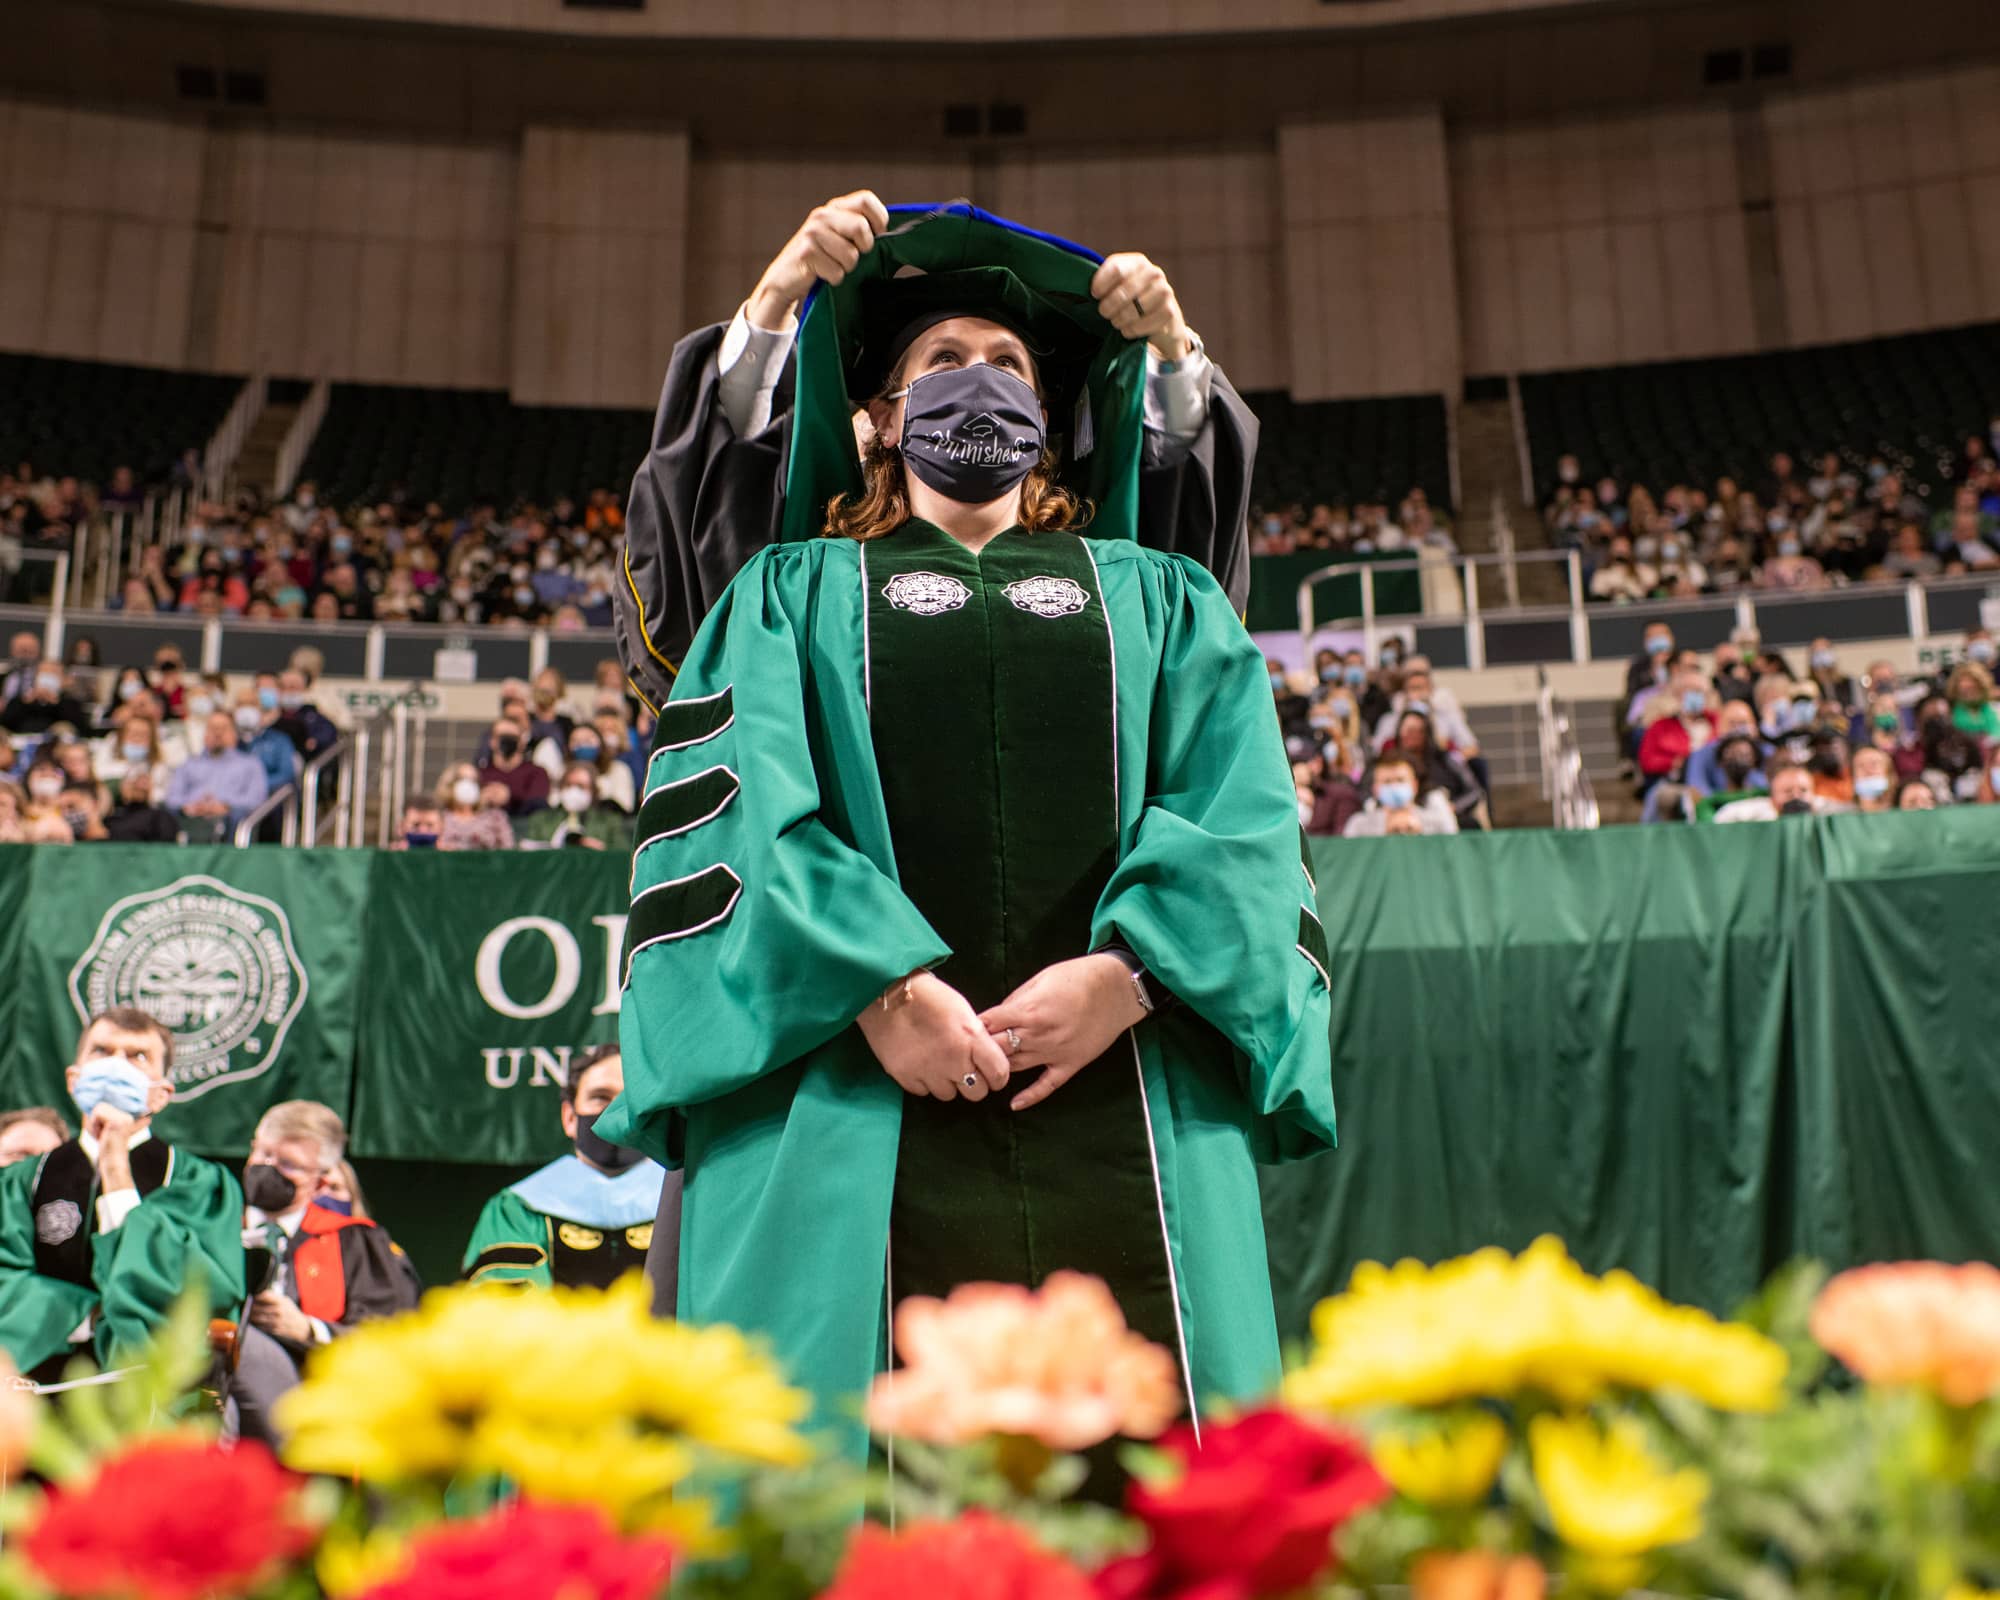 A graduate receives recognition during the Fall Commencement 2021 at the Athens Campus.